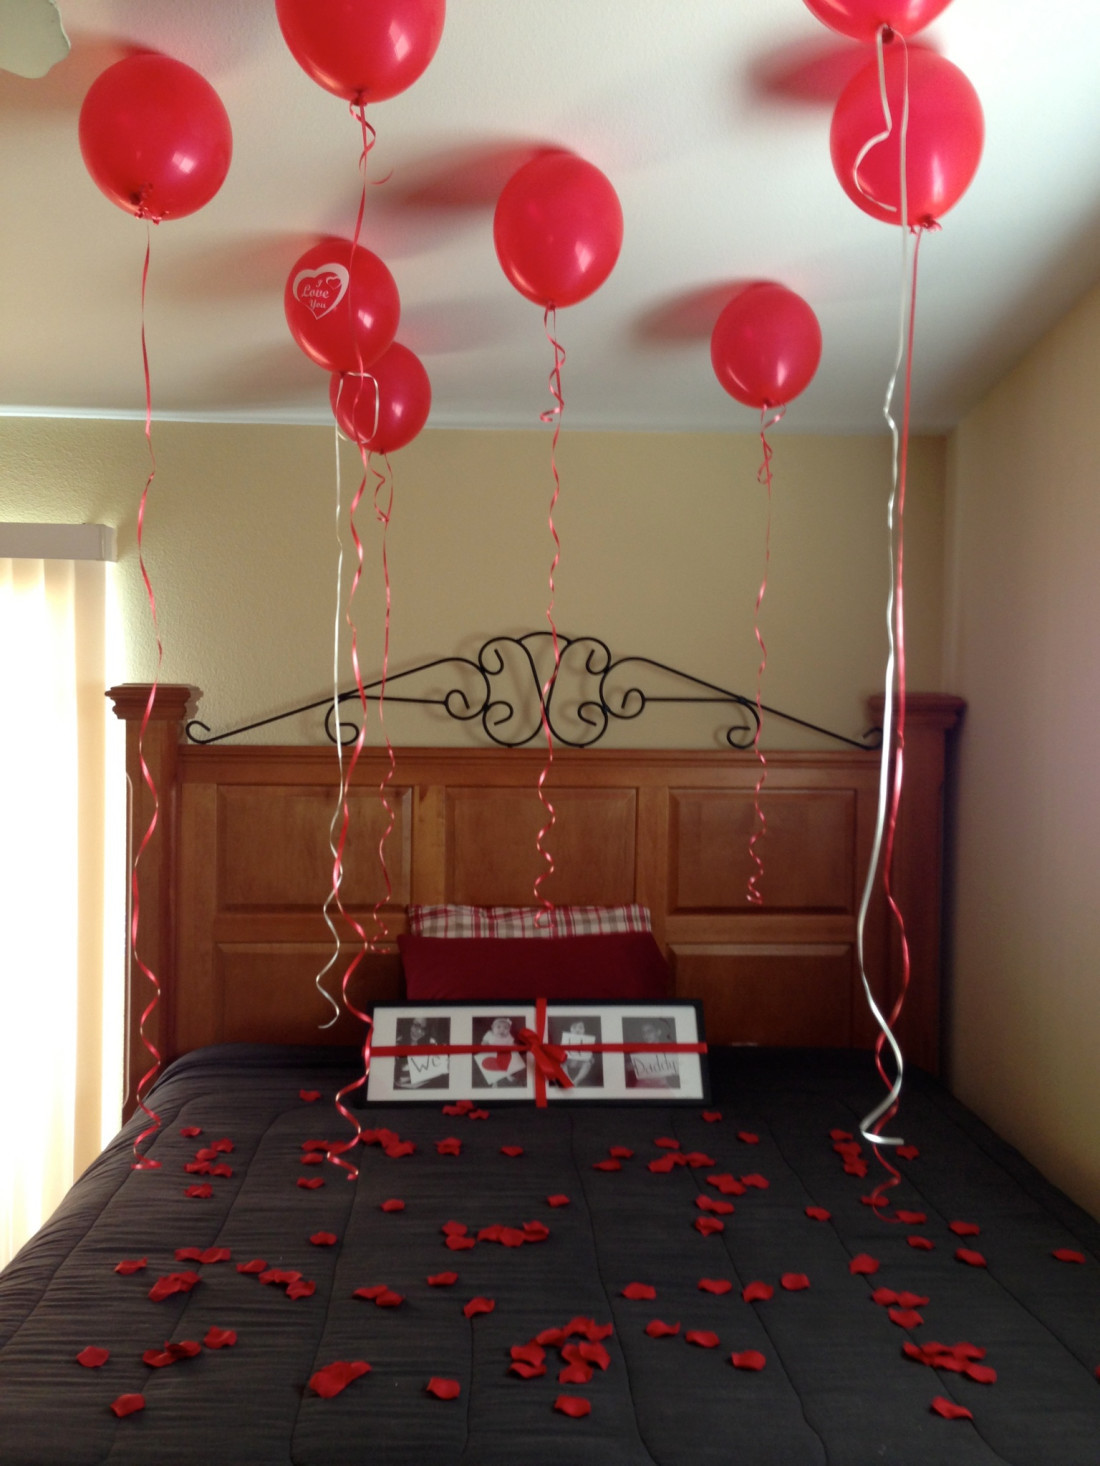 Valentines Day Gift Ideas For My Husband
 10 Creative Ways to Surprise Your Hubby for Valentine s